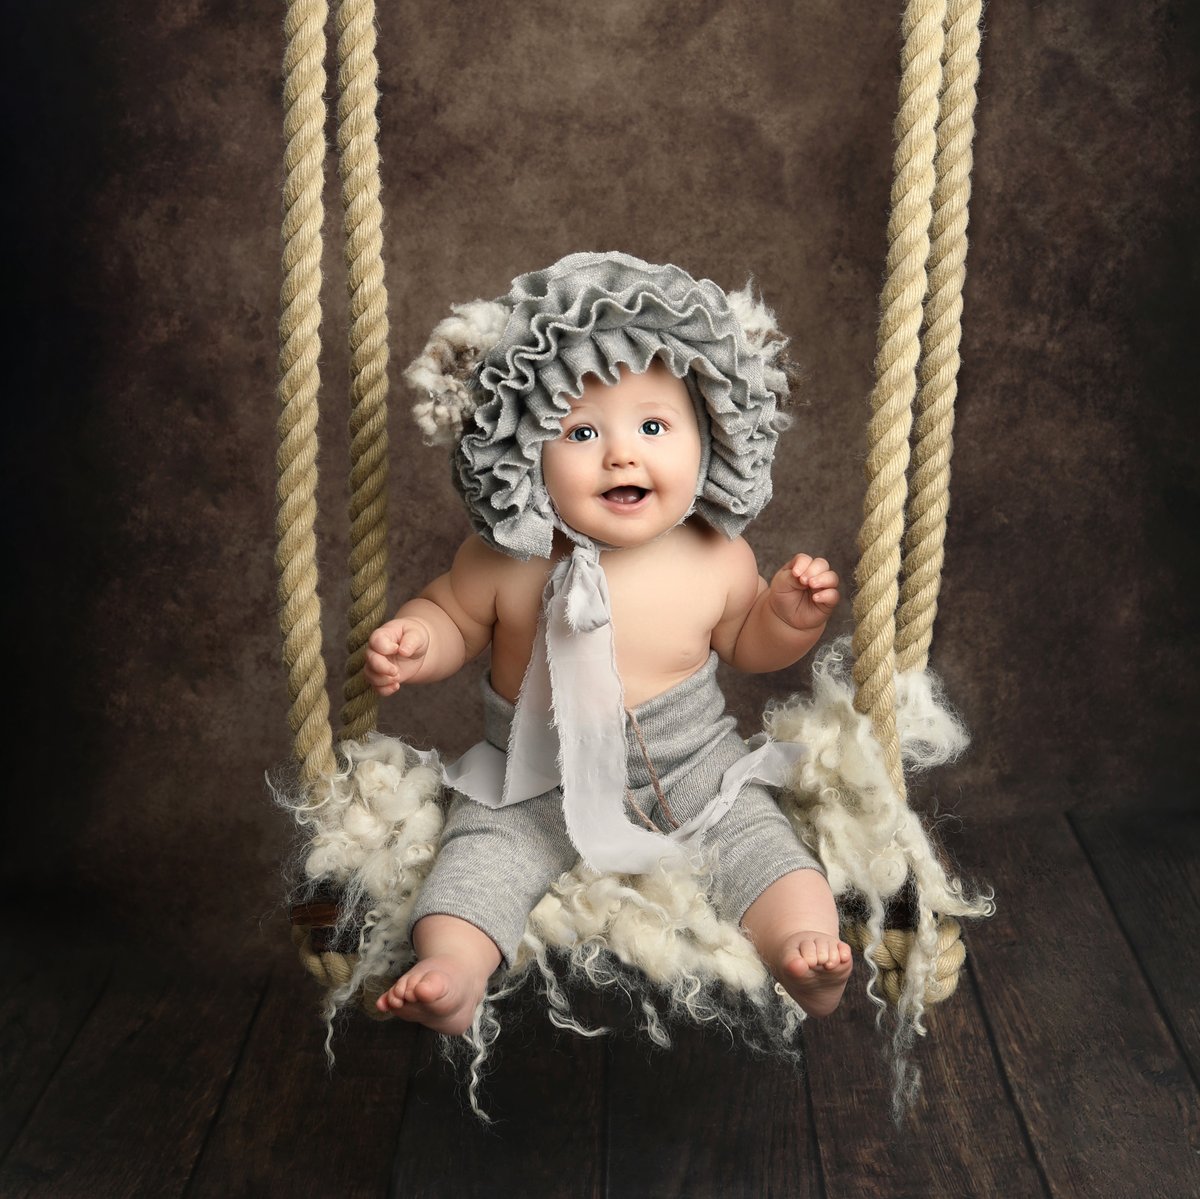 smiling baby on a swing posing for a professionally taken photograph